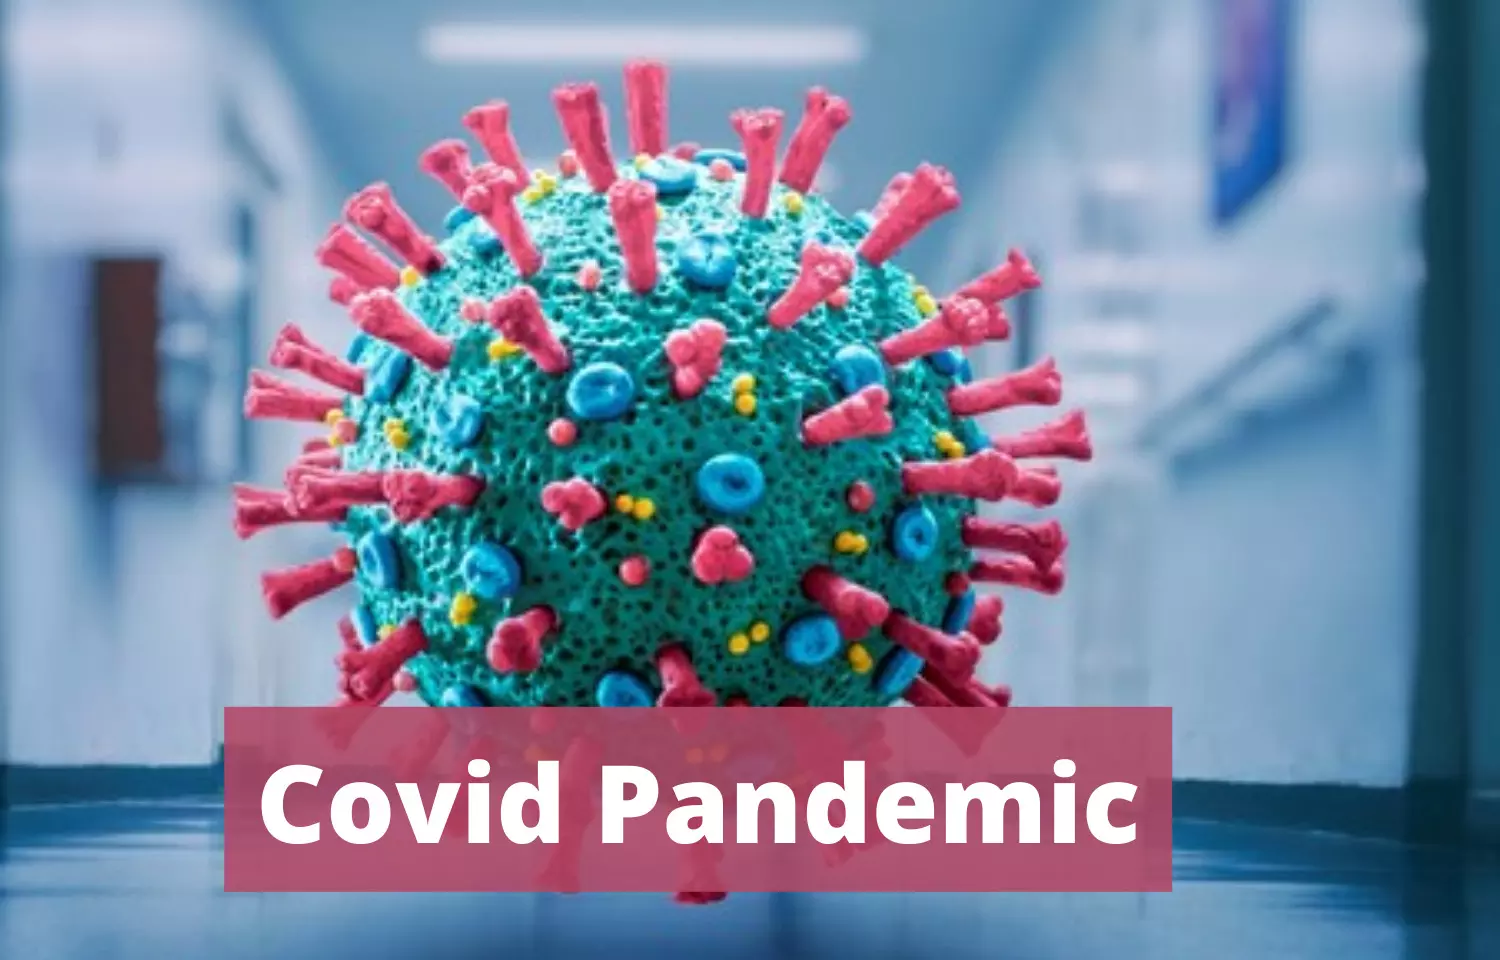 Pandemic may see an end in 2022: WHO